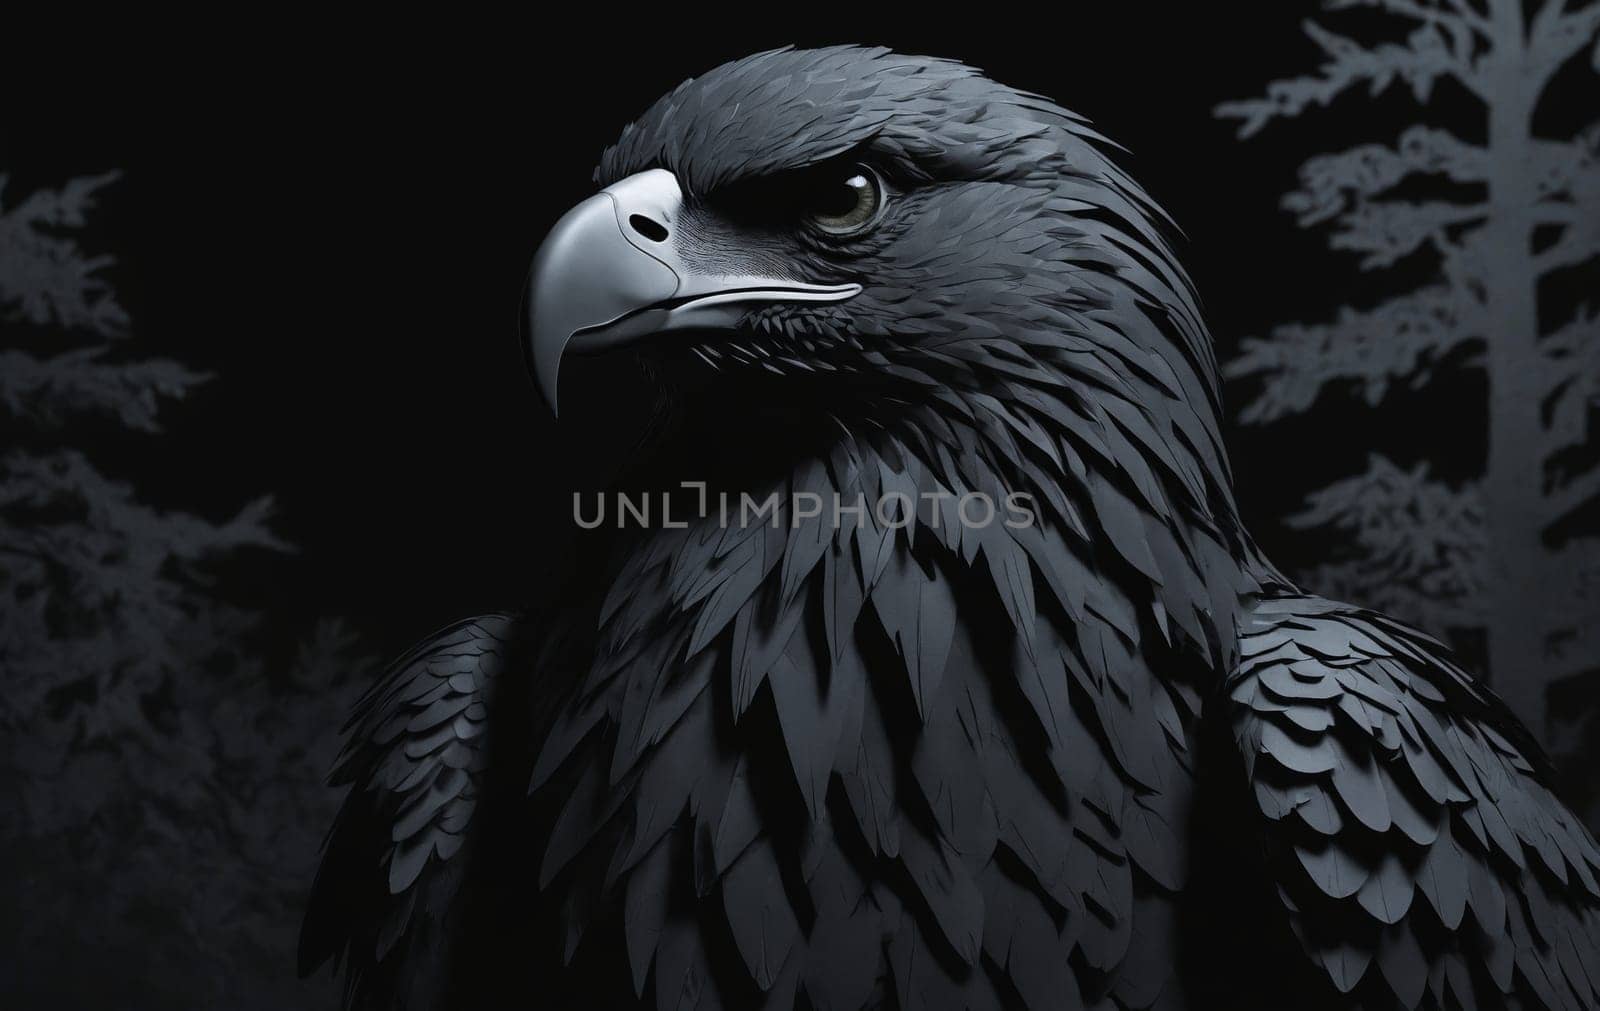 A striking black and white illustration captures the majestic gaze of an eagle, radiating power and freedom.